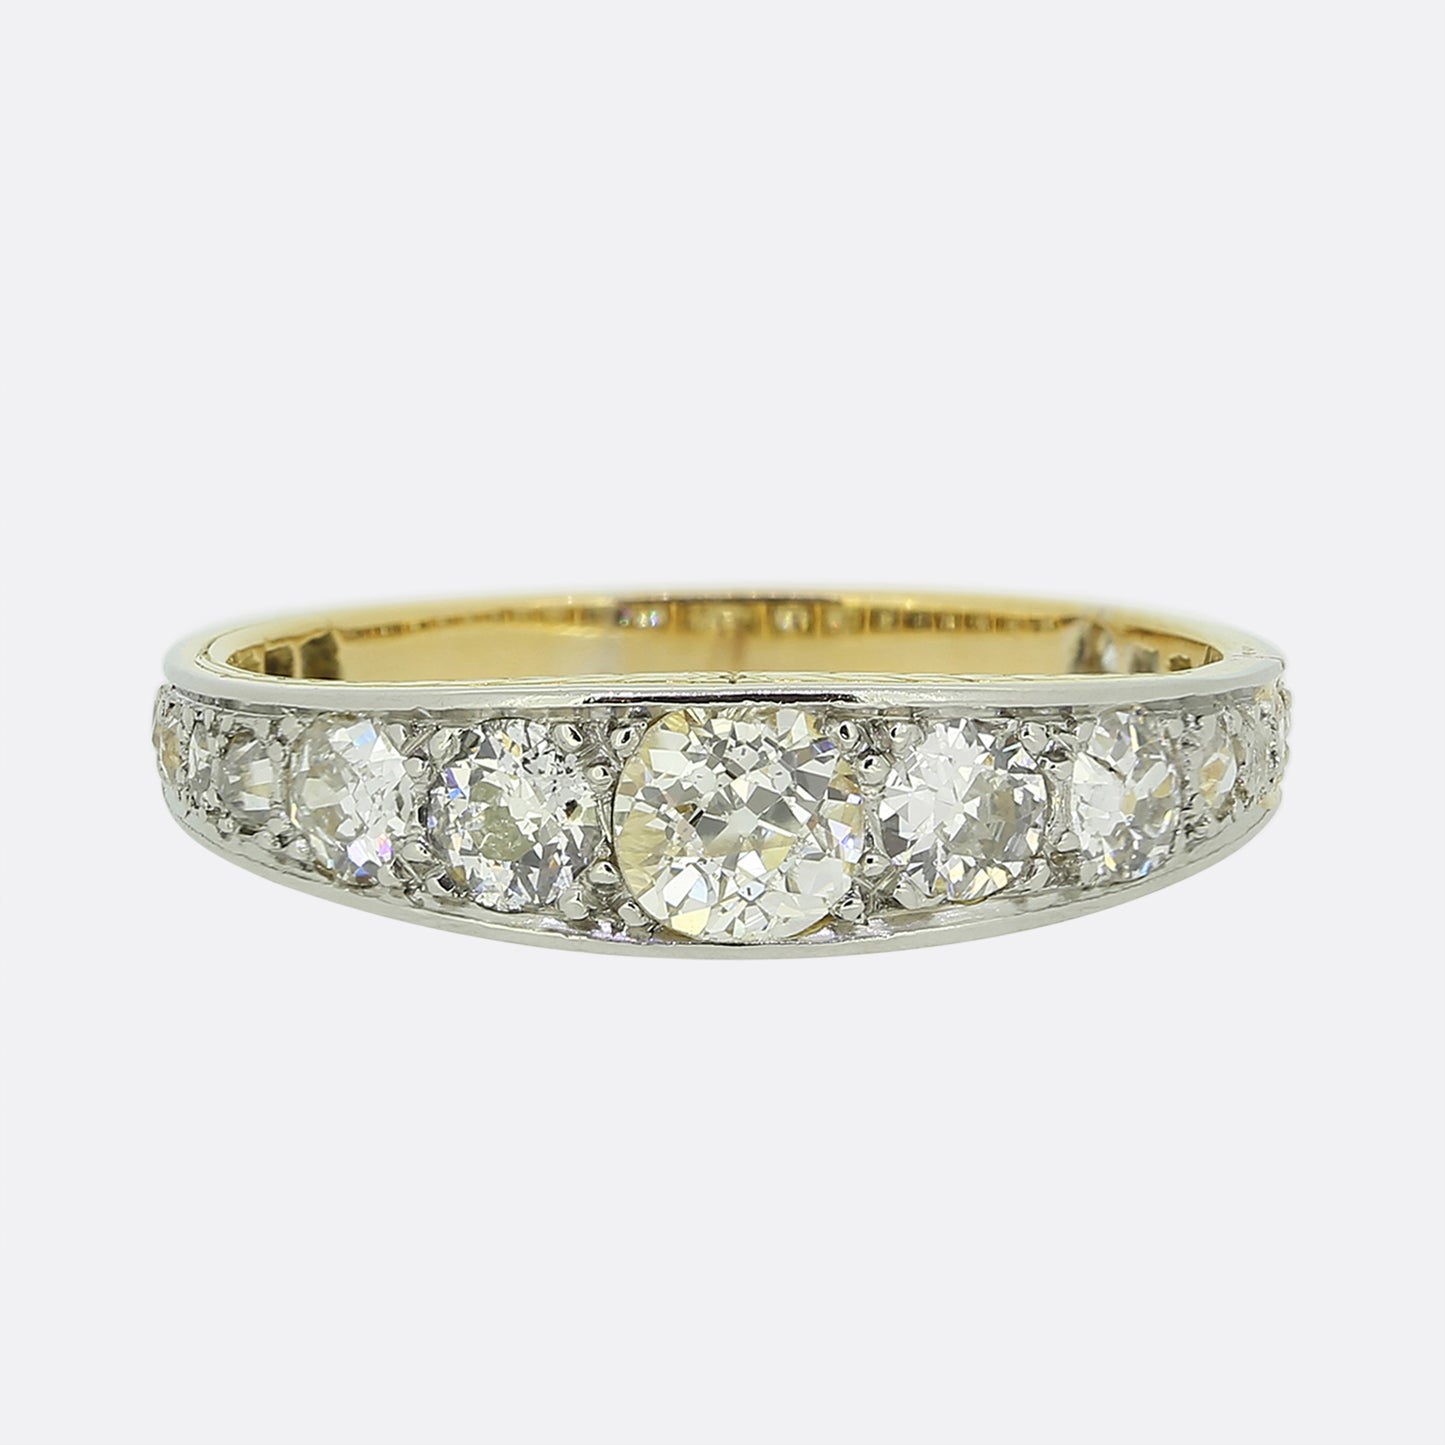 Antique Old Cut Diamond Band Ring